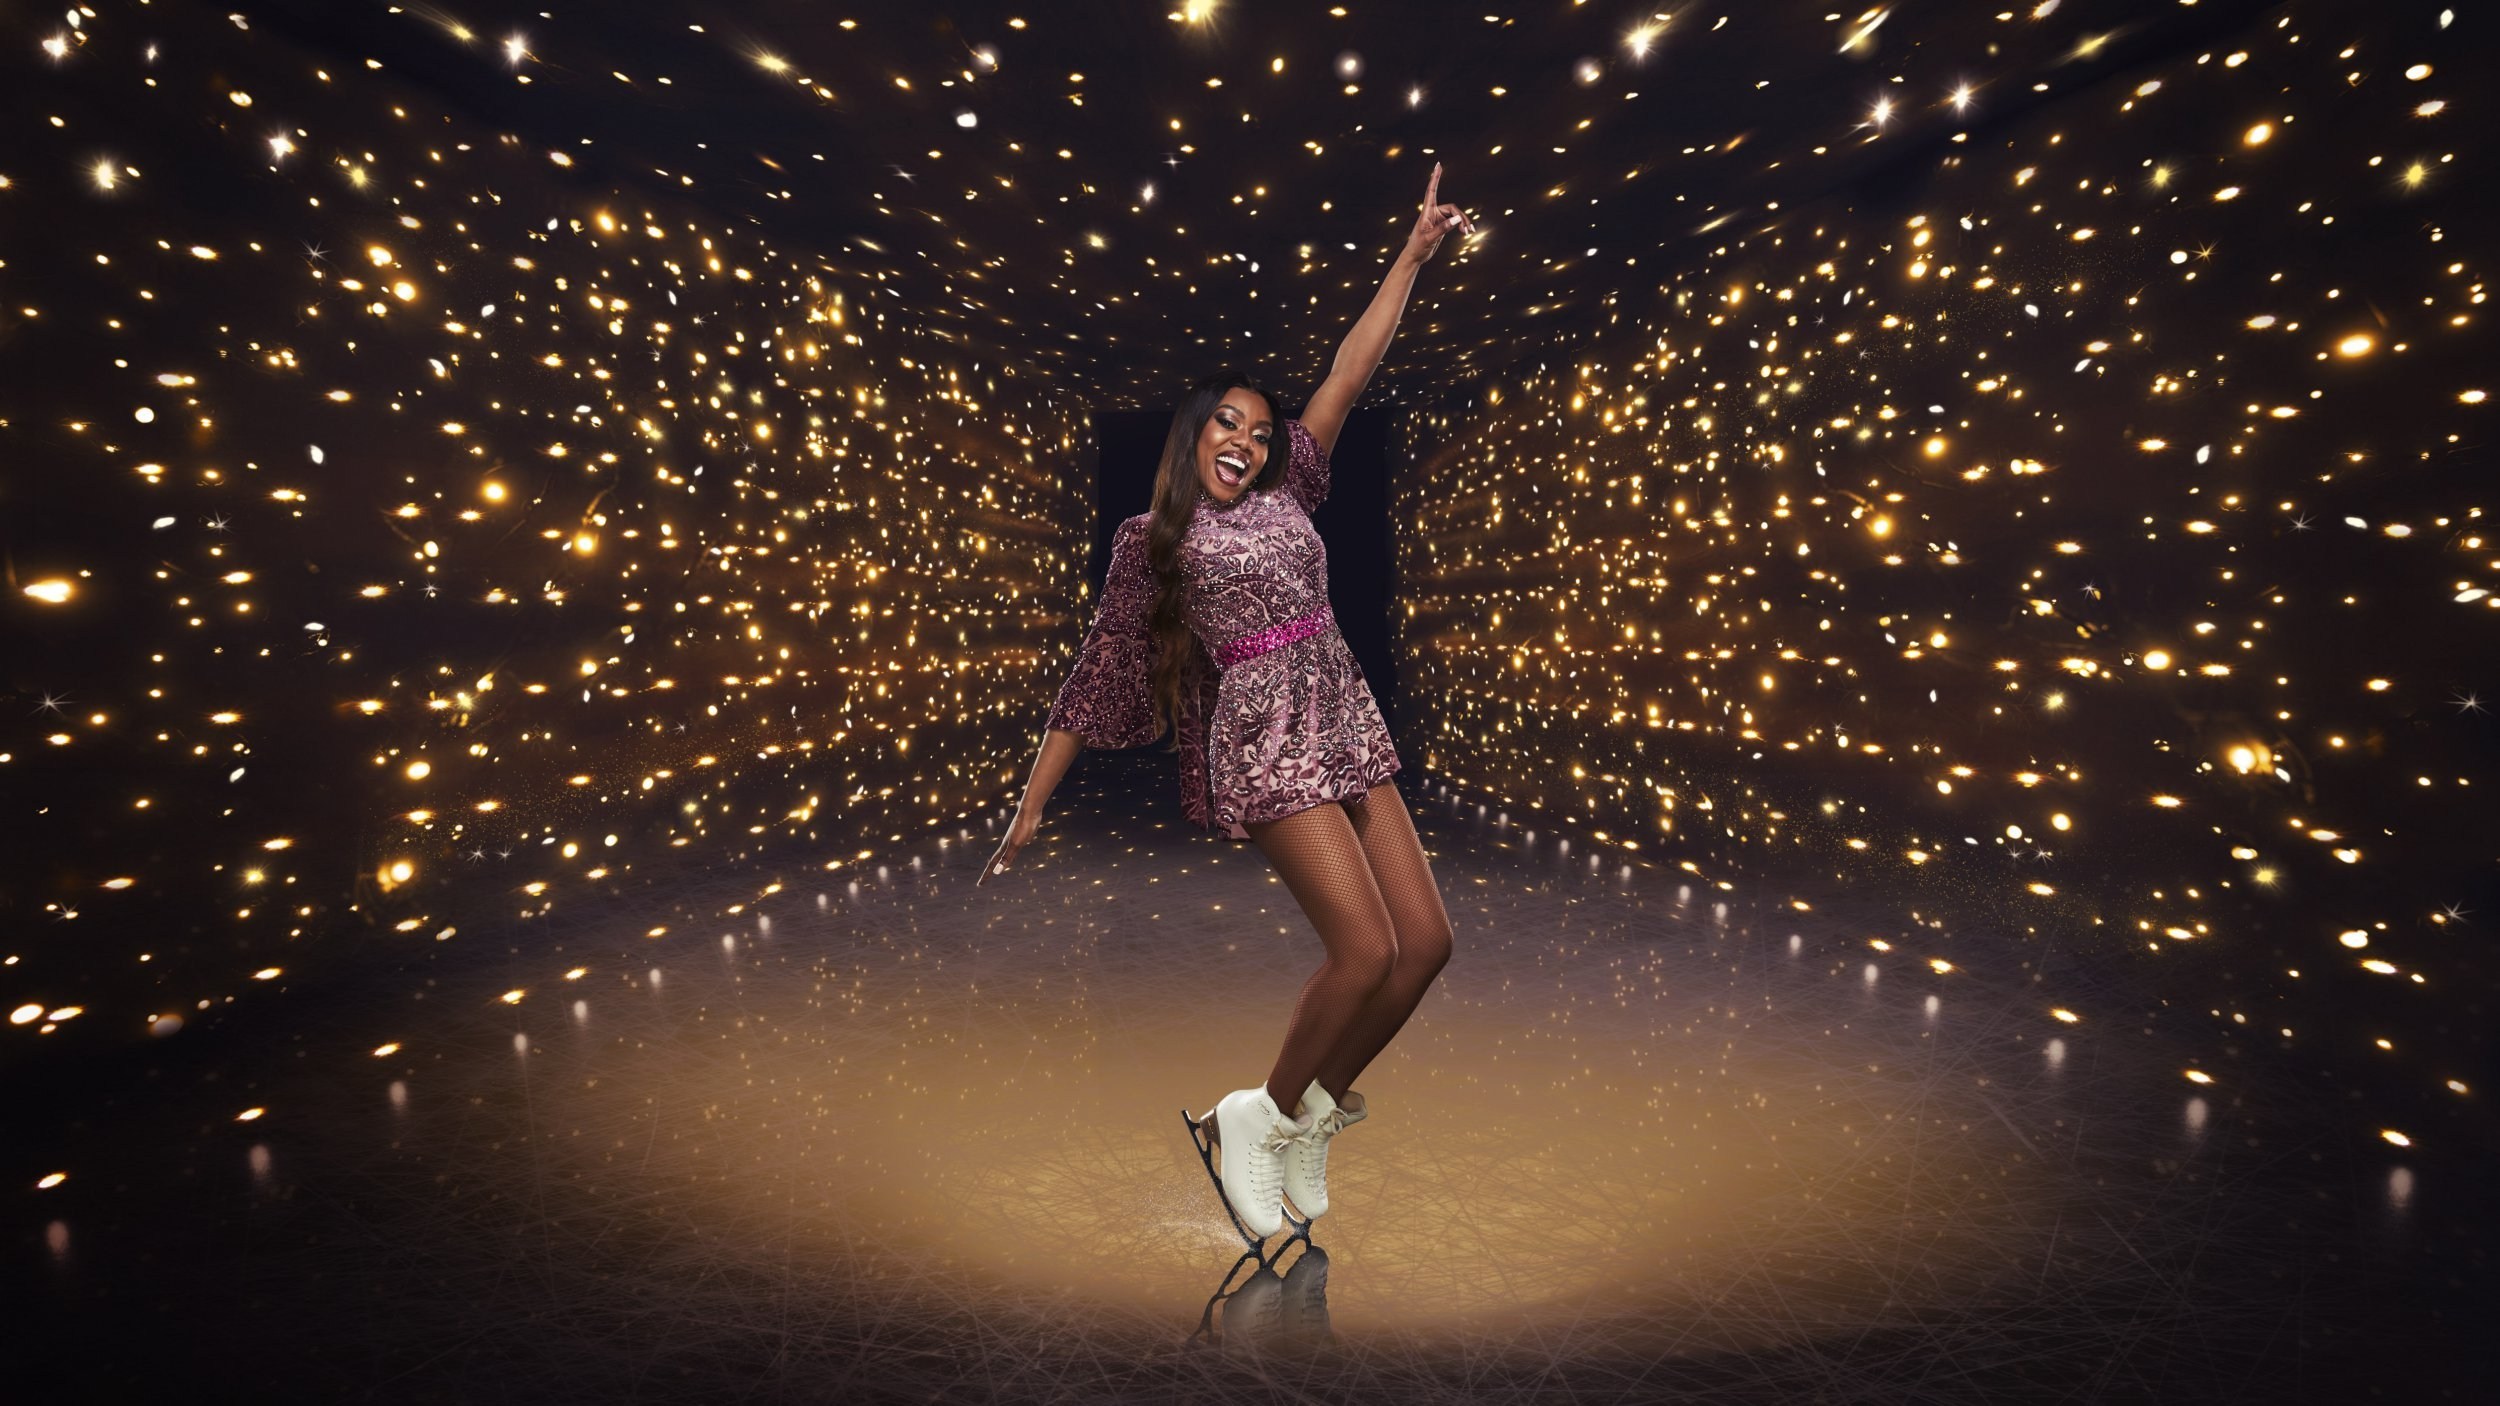 Who is Dancing On Ice star Lady Leshurr and what songs does she perform?